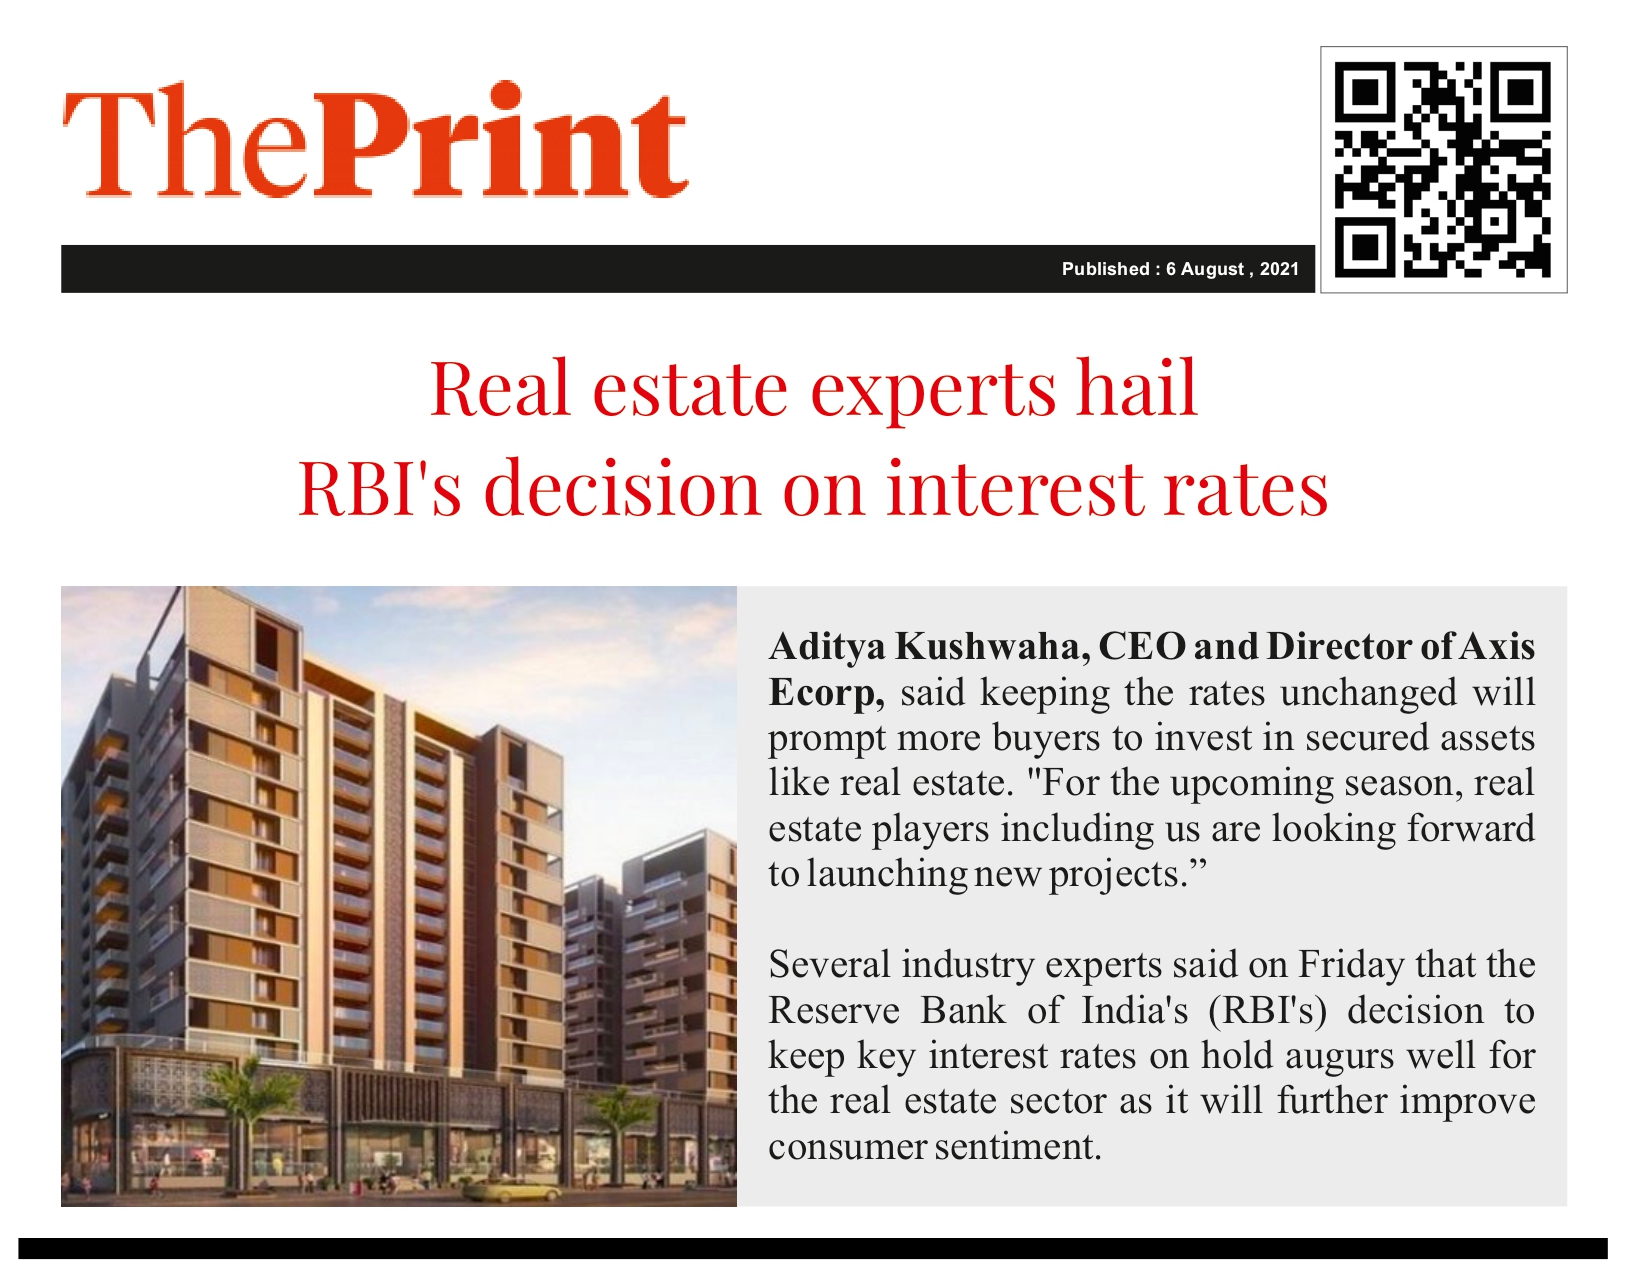 Real estate experts hail RBI’s decision to hold interest rates